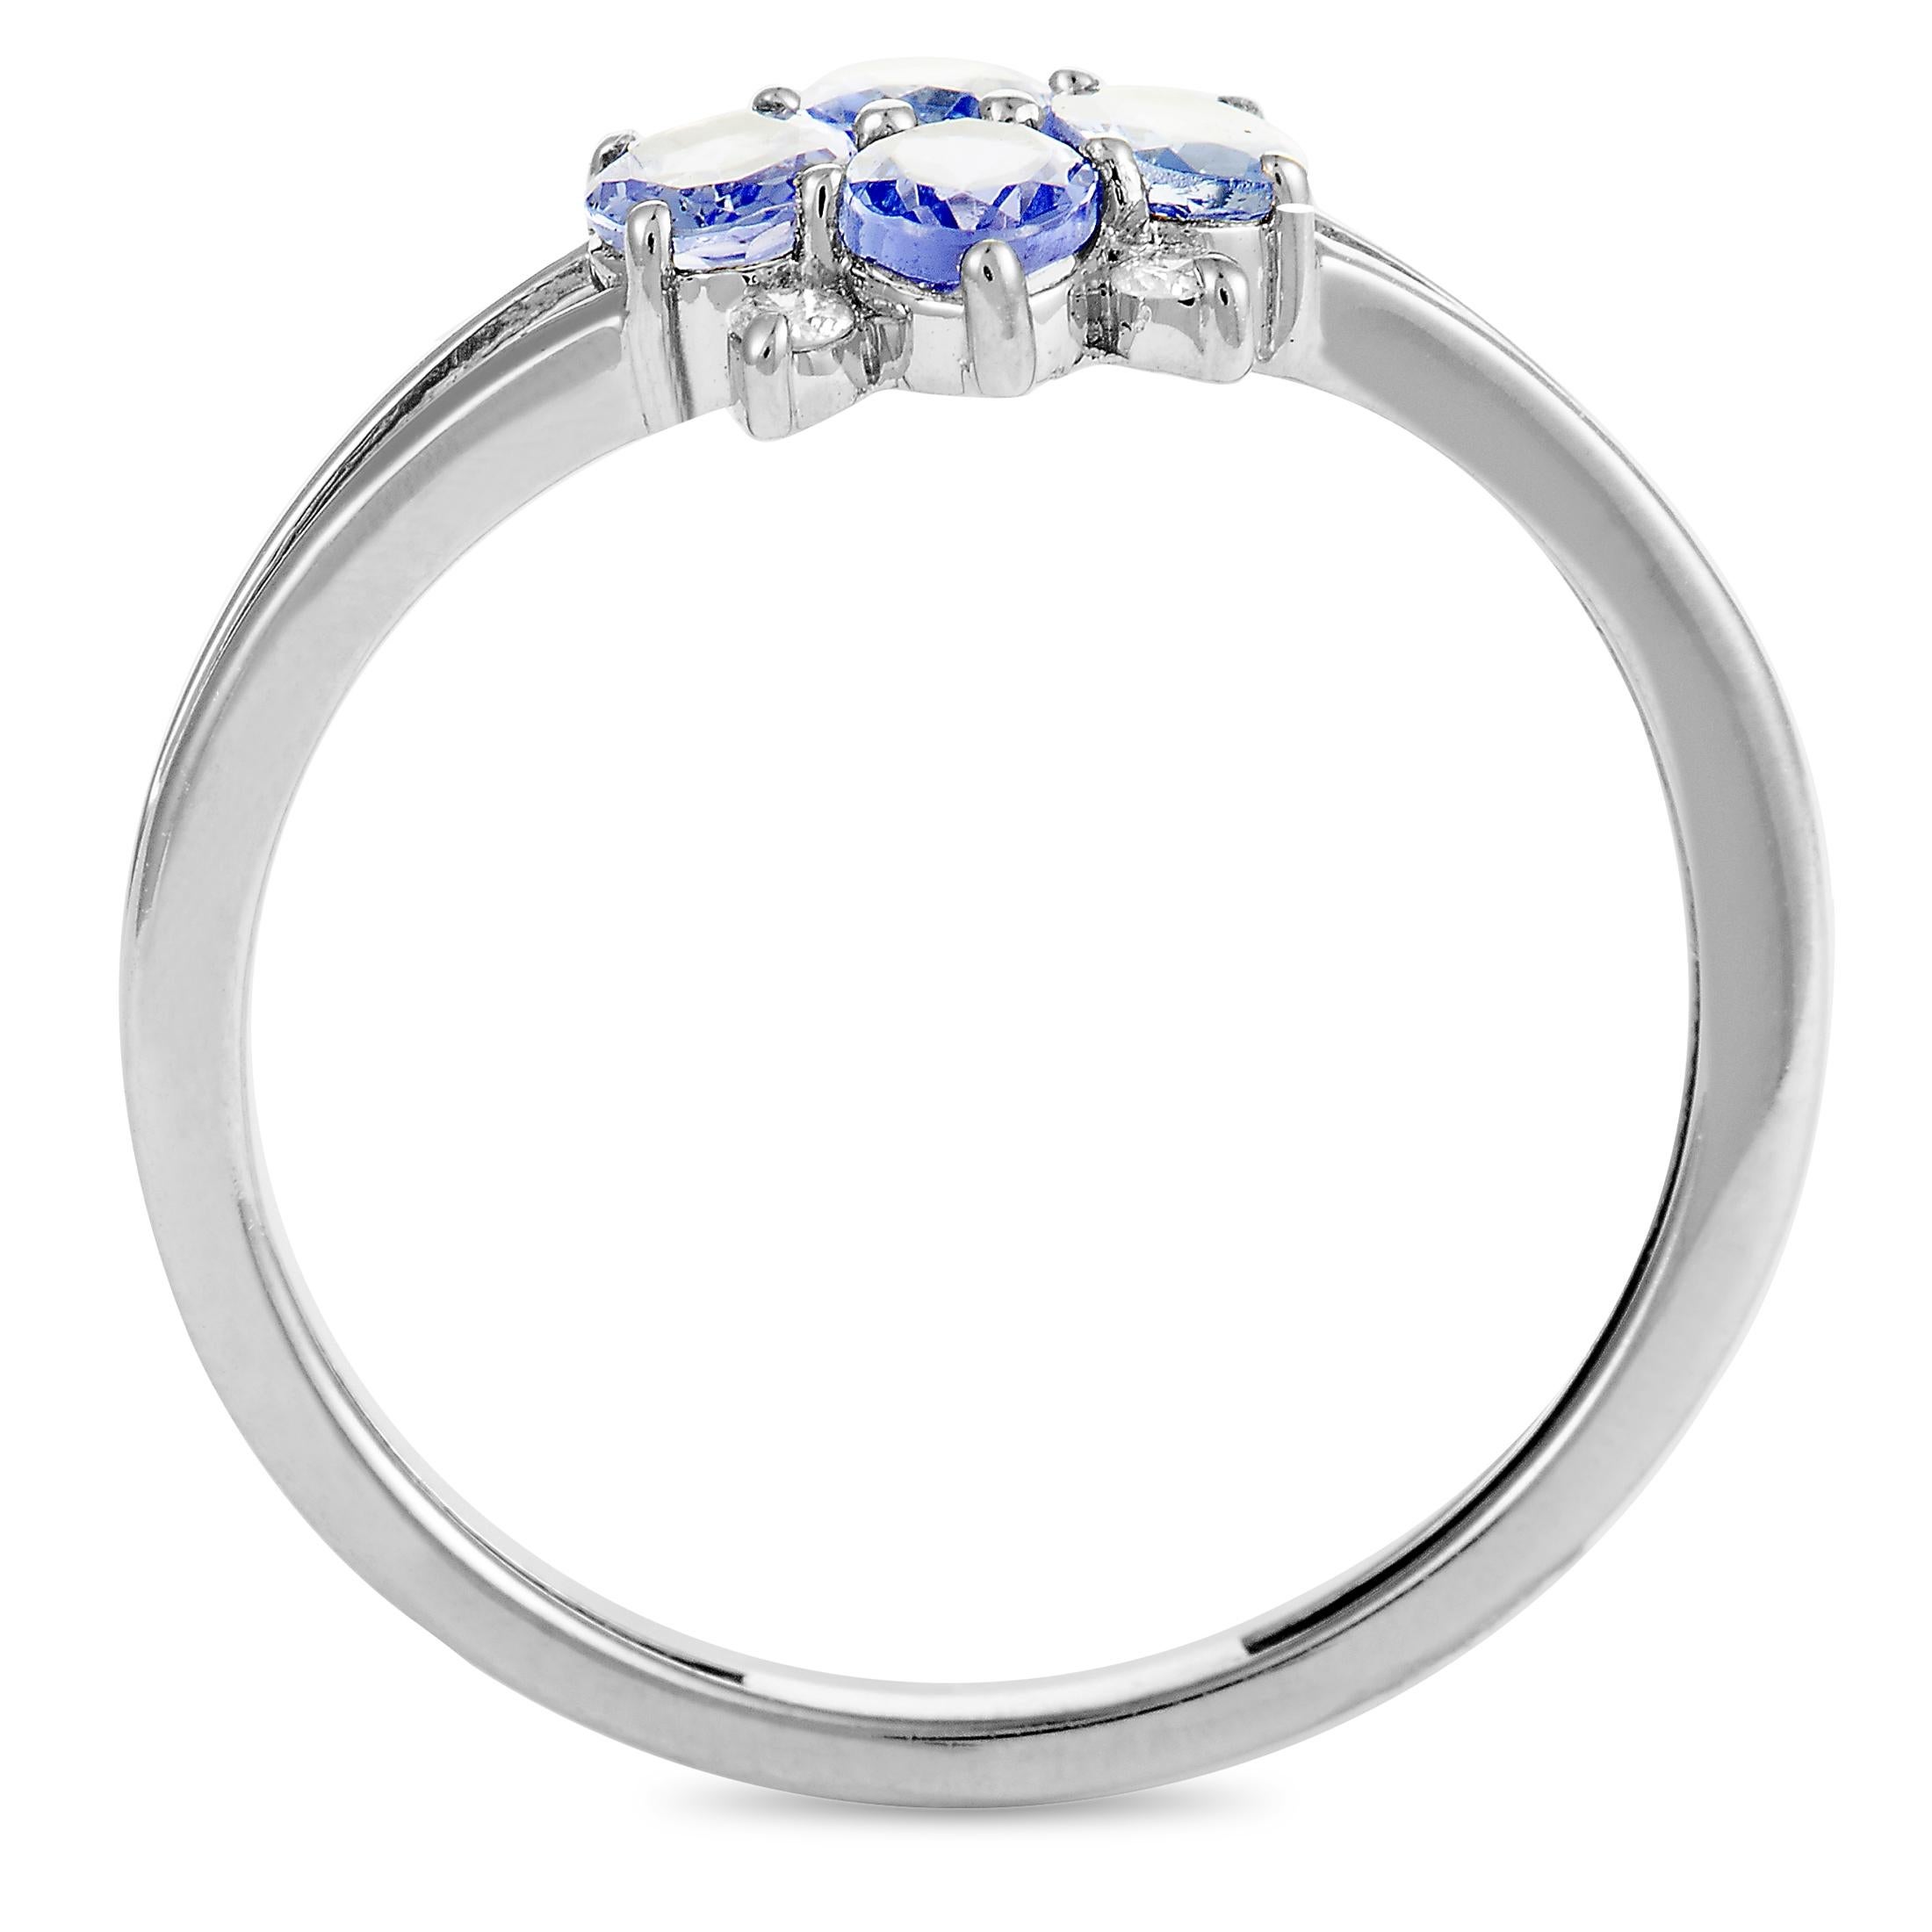 This ring is made of 14K white gold and set with sapphires and a total of 0.06 carats of diamonds. The ring weighs 1.5 grams, boasting band thickness of 1 mm and top height of 3 mm, while top dimensions measure 8 by 8 mm.
 
 Offered in brand new